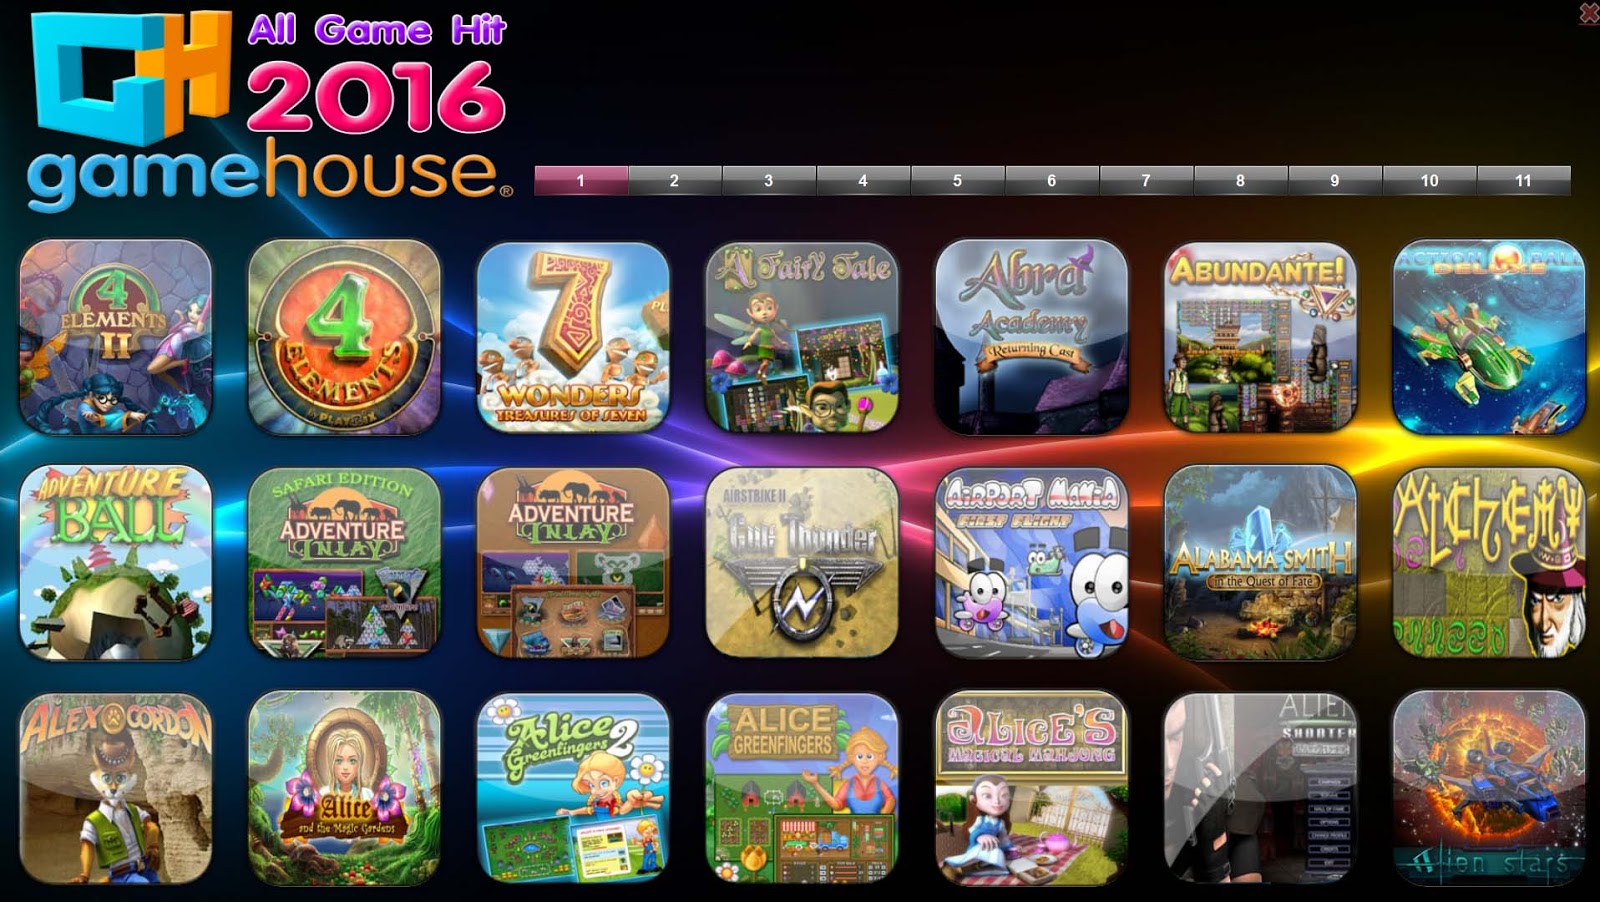 Free full gamehouse downloads